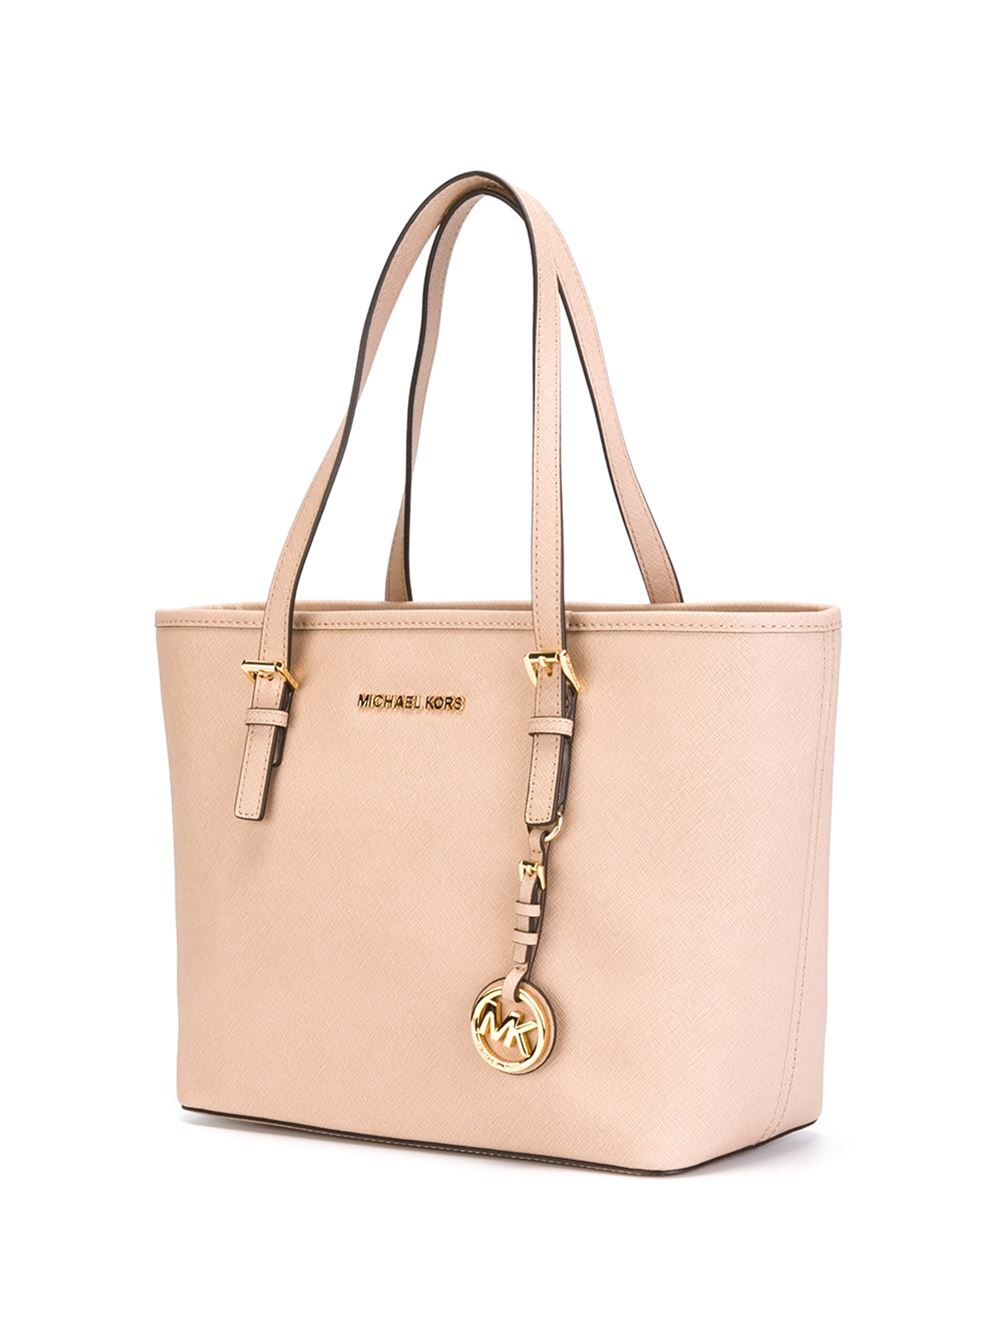 MICHAEL Michael Kors Small 'jet Set Travel' Tote in Natural - Lyst